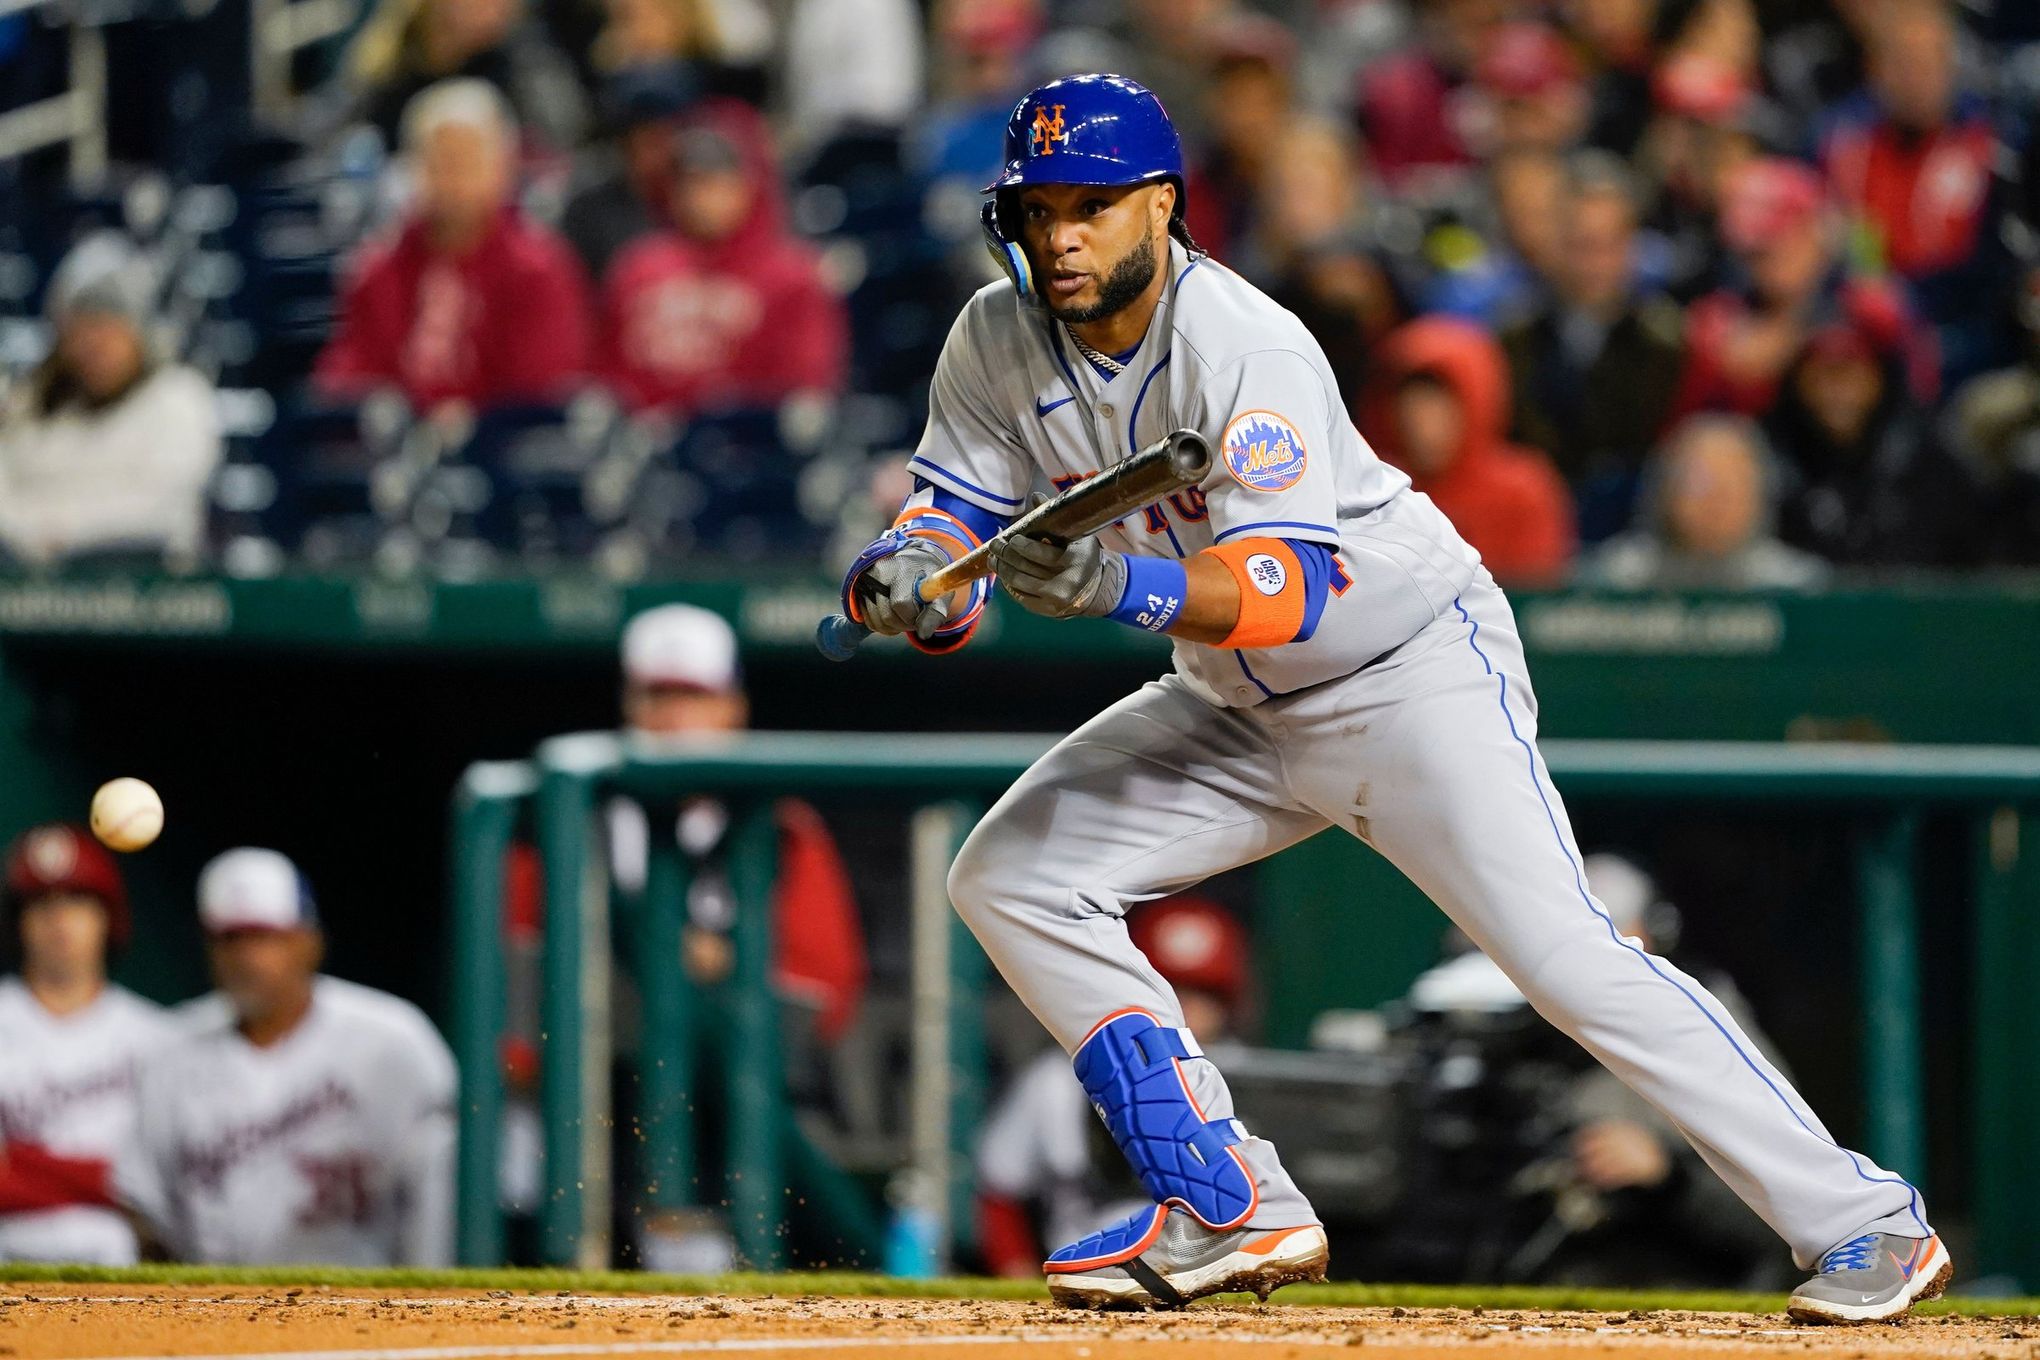 Mets Officially Release Robinson Cano, Will Pay $45 Million